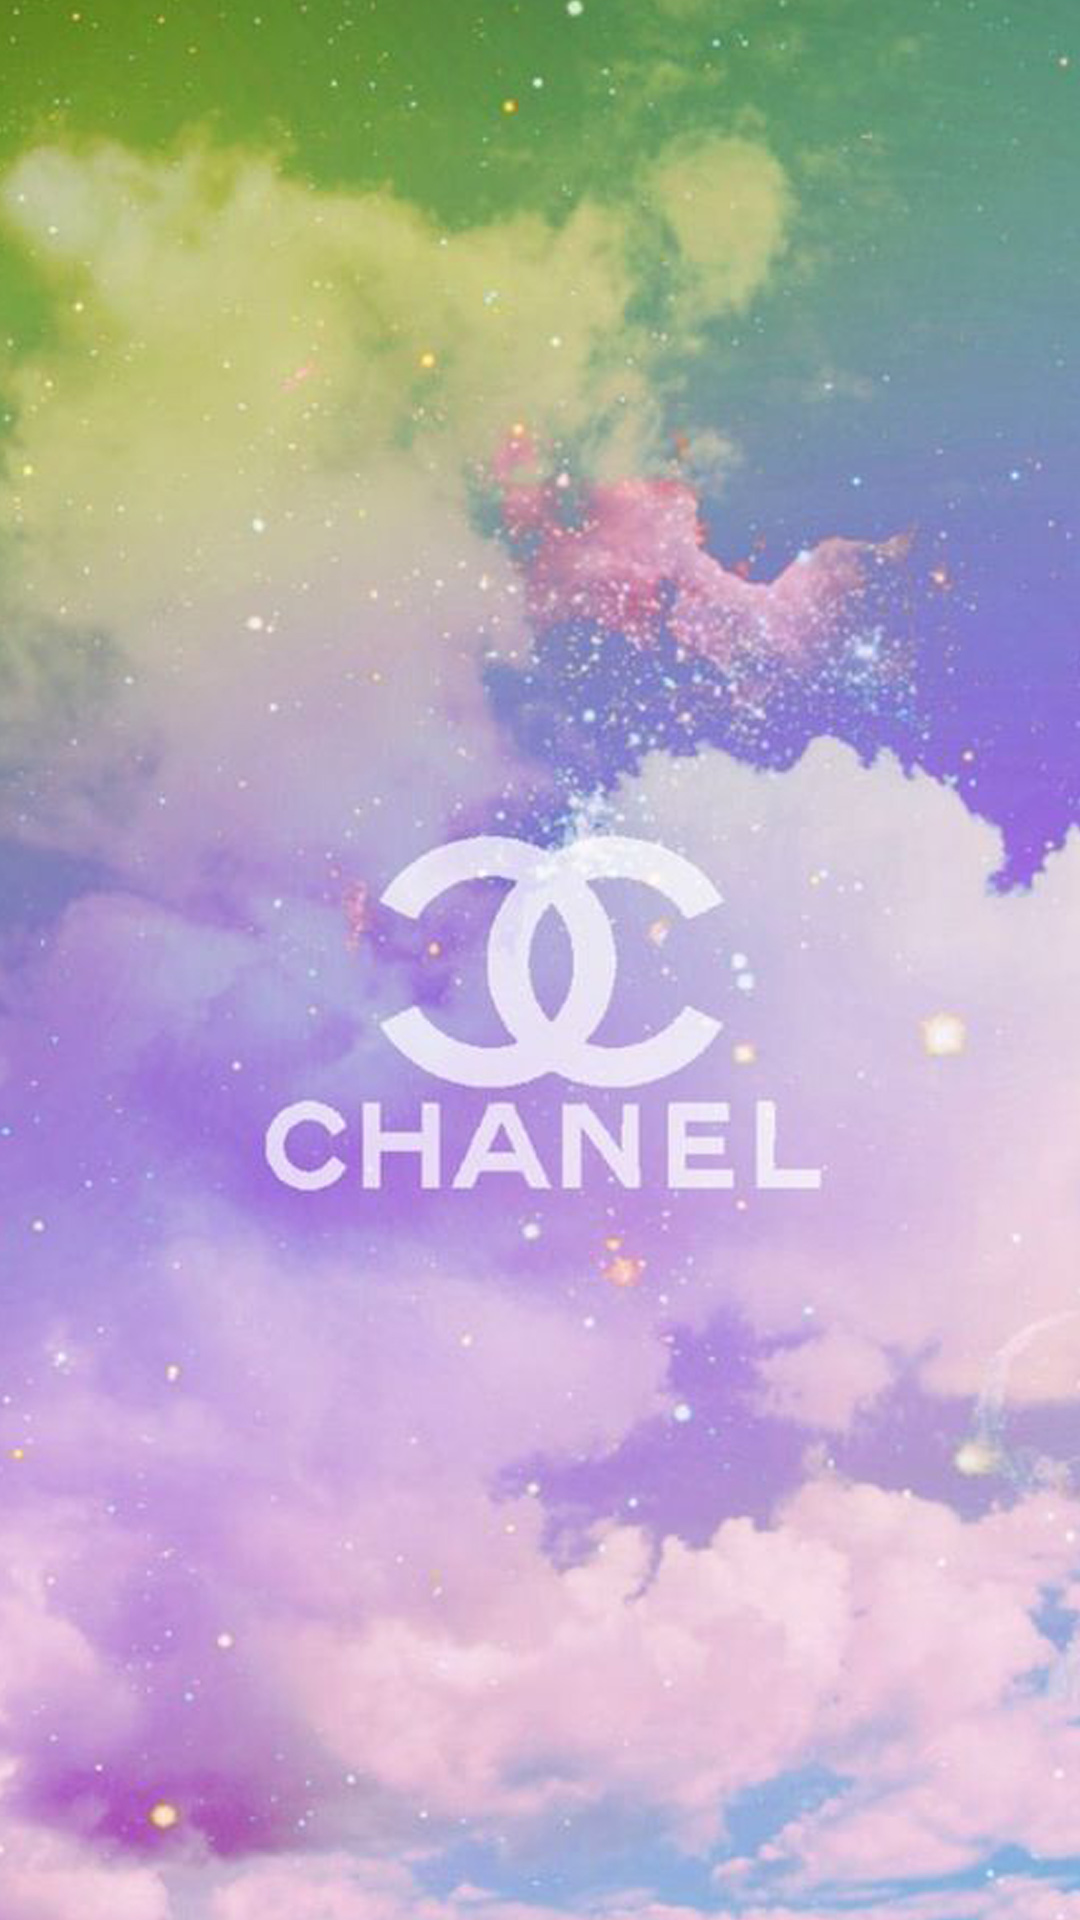 Chanel Wallpaper Collection For